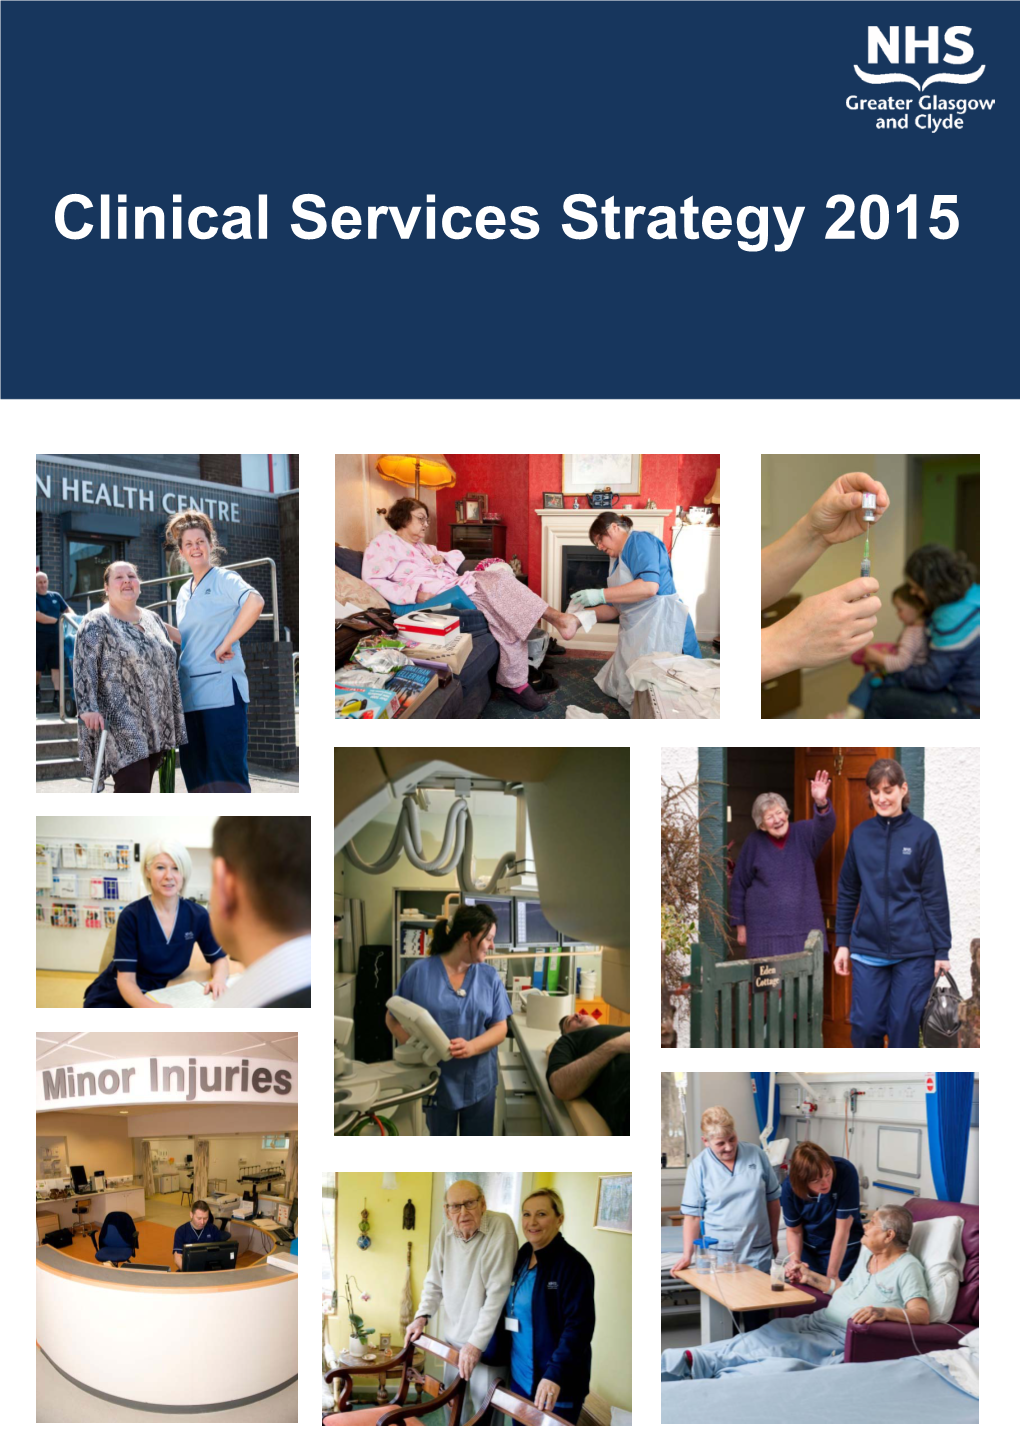 NHSGGC Clinical Services Strategy 2015